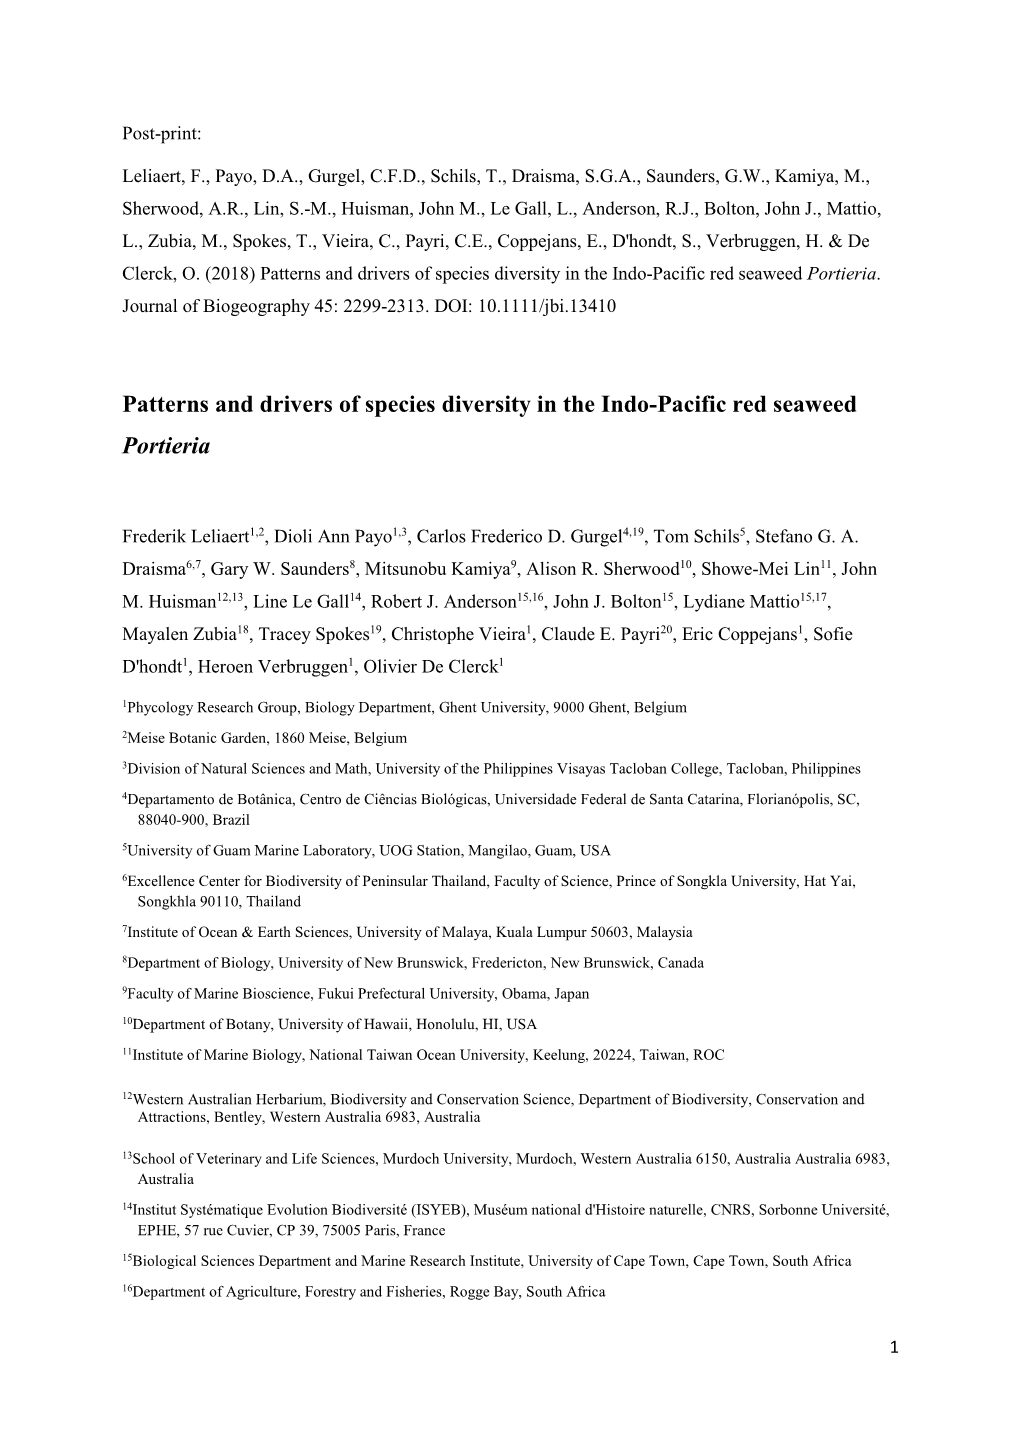 Patterns and Drivers of Species Diversity in the Indo-Pacific Red Seaweed Portieria